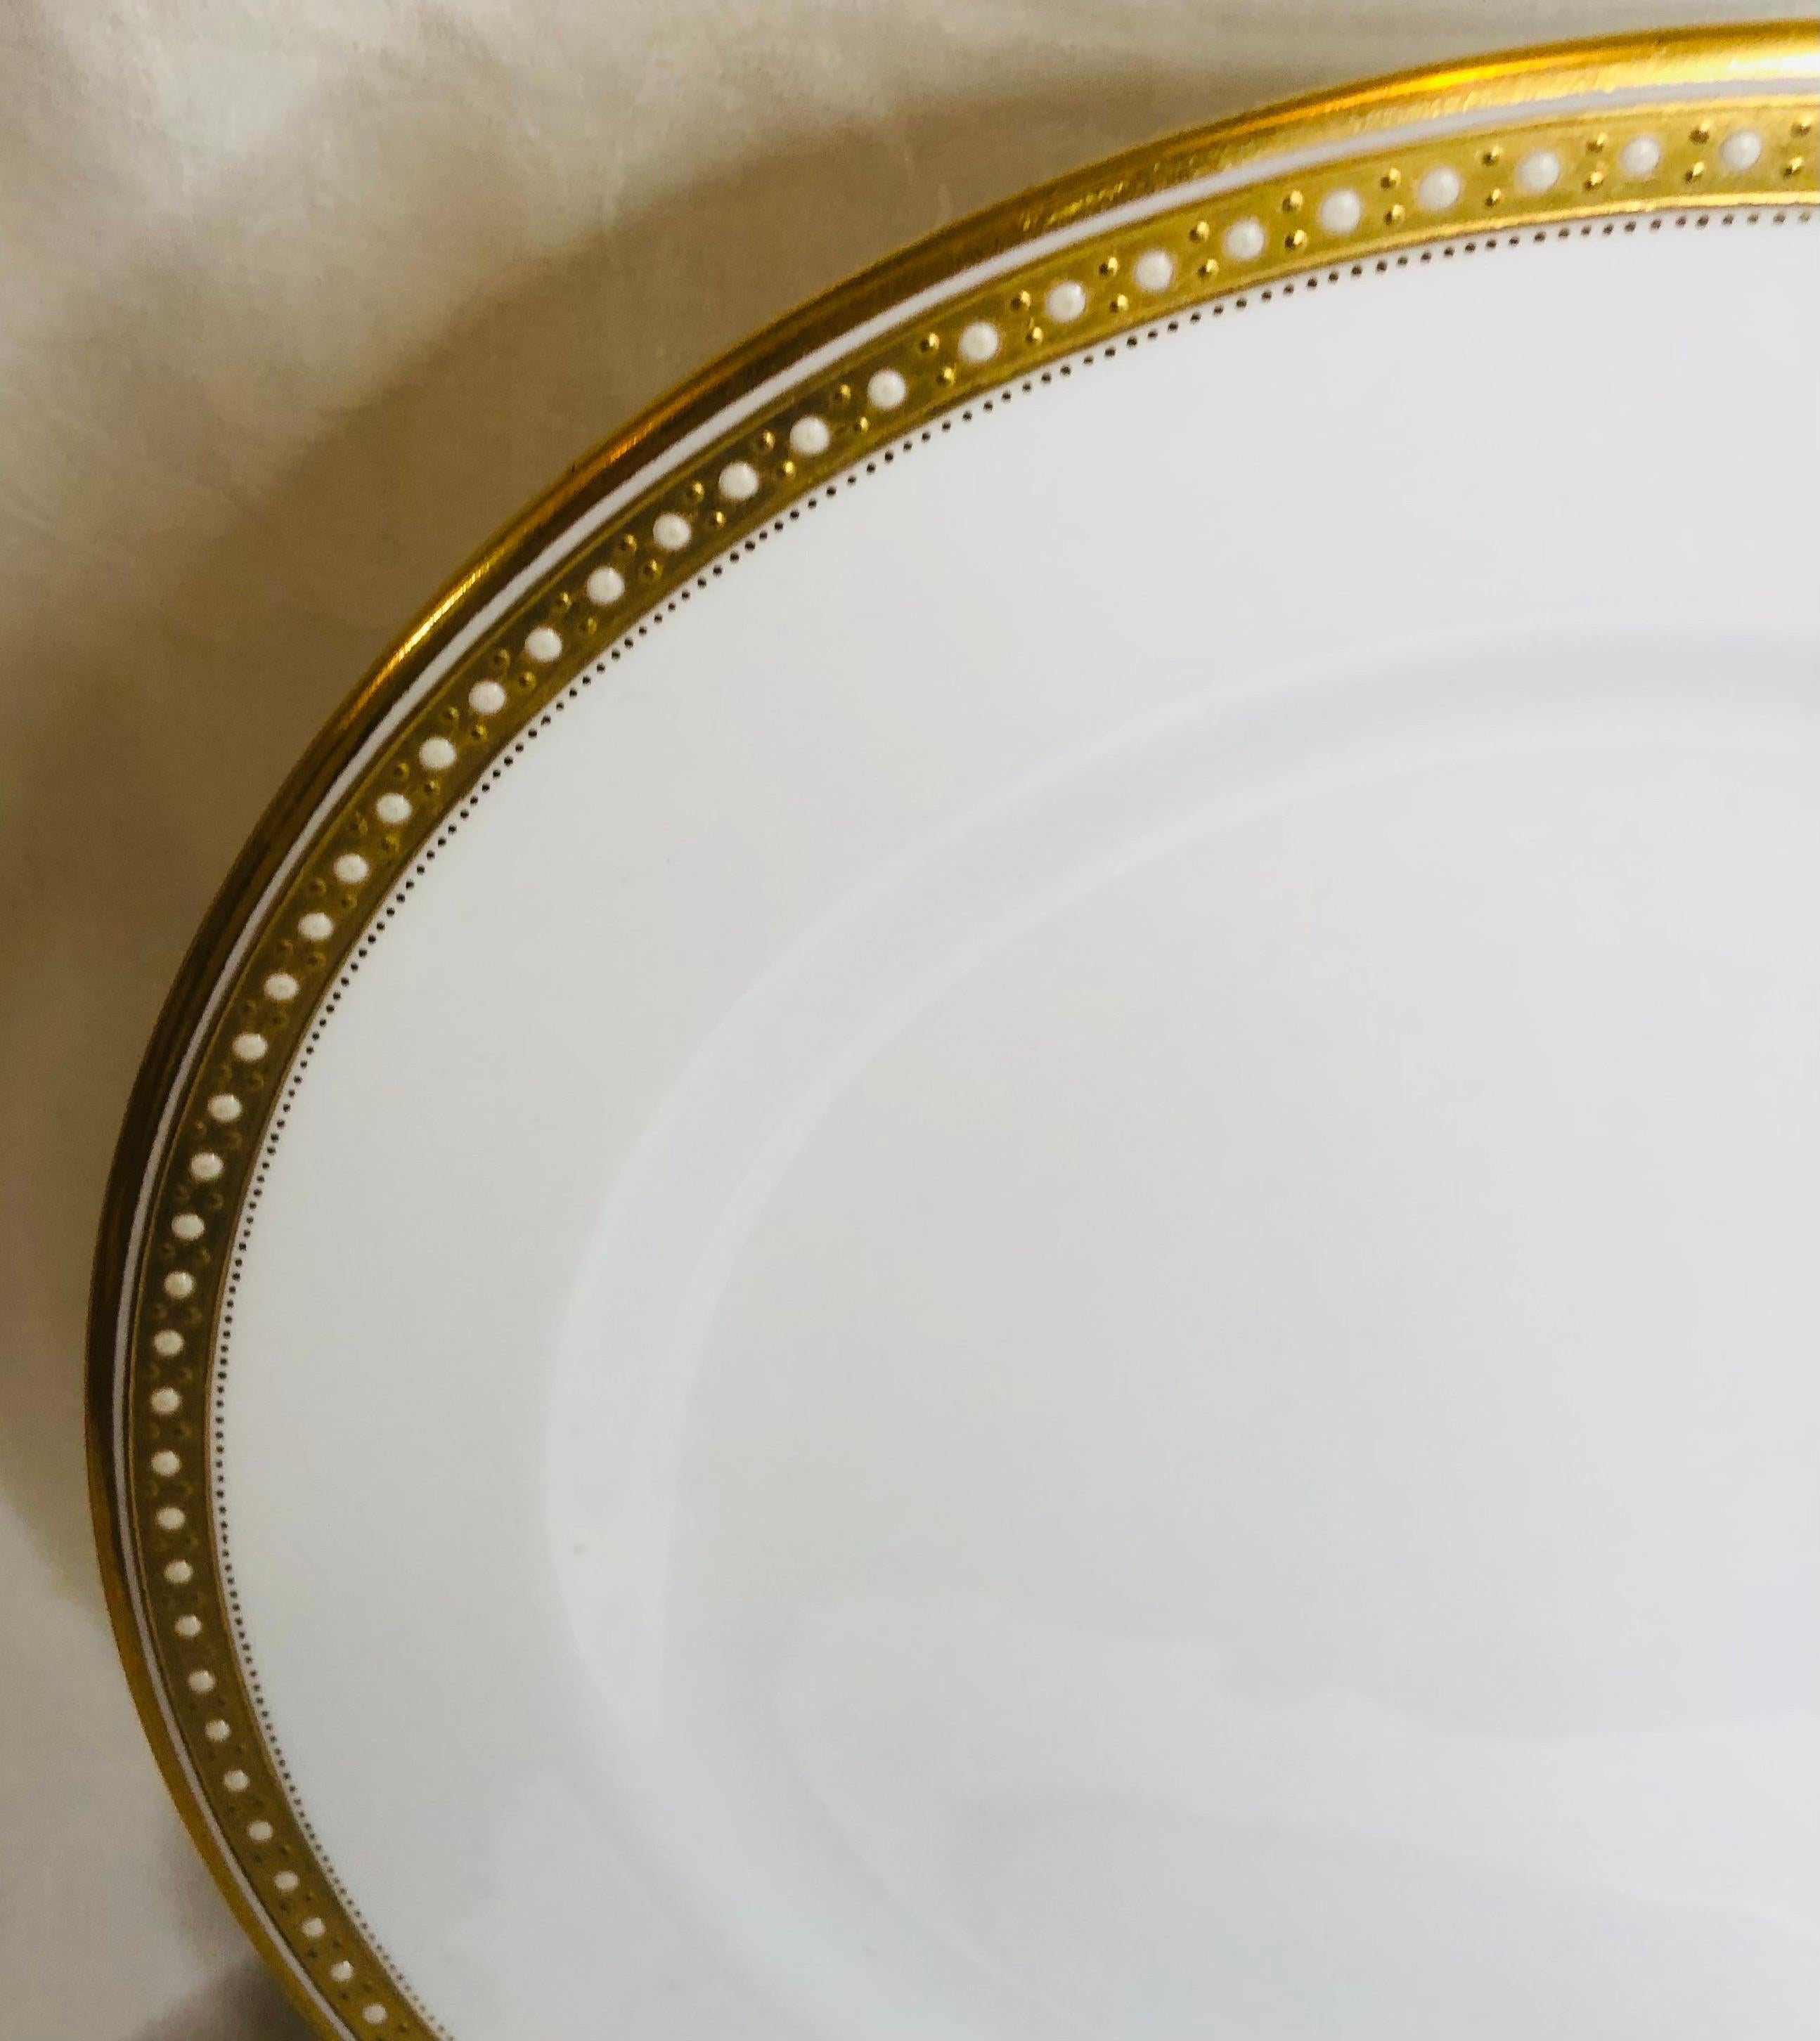 Neoclassical 16 Copeland Spode Dinner Plates with Gold Rim & White Jeweling Made for T. Goode